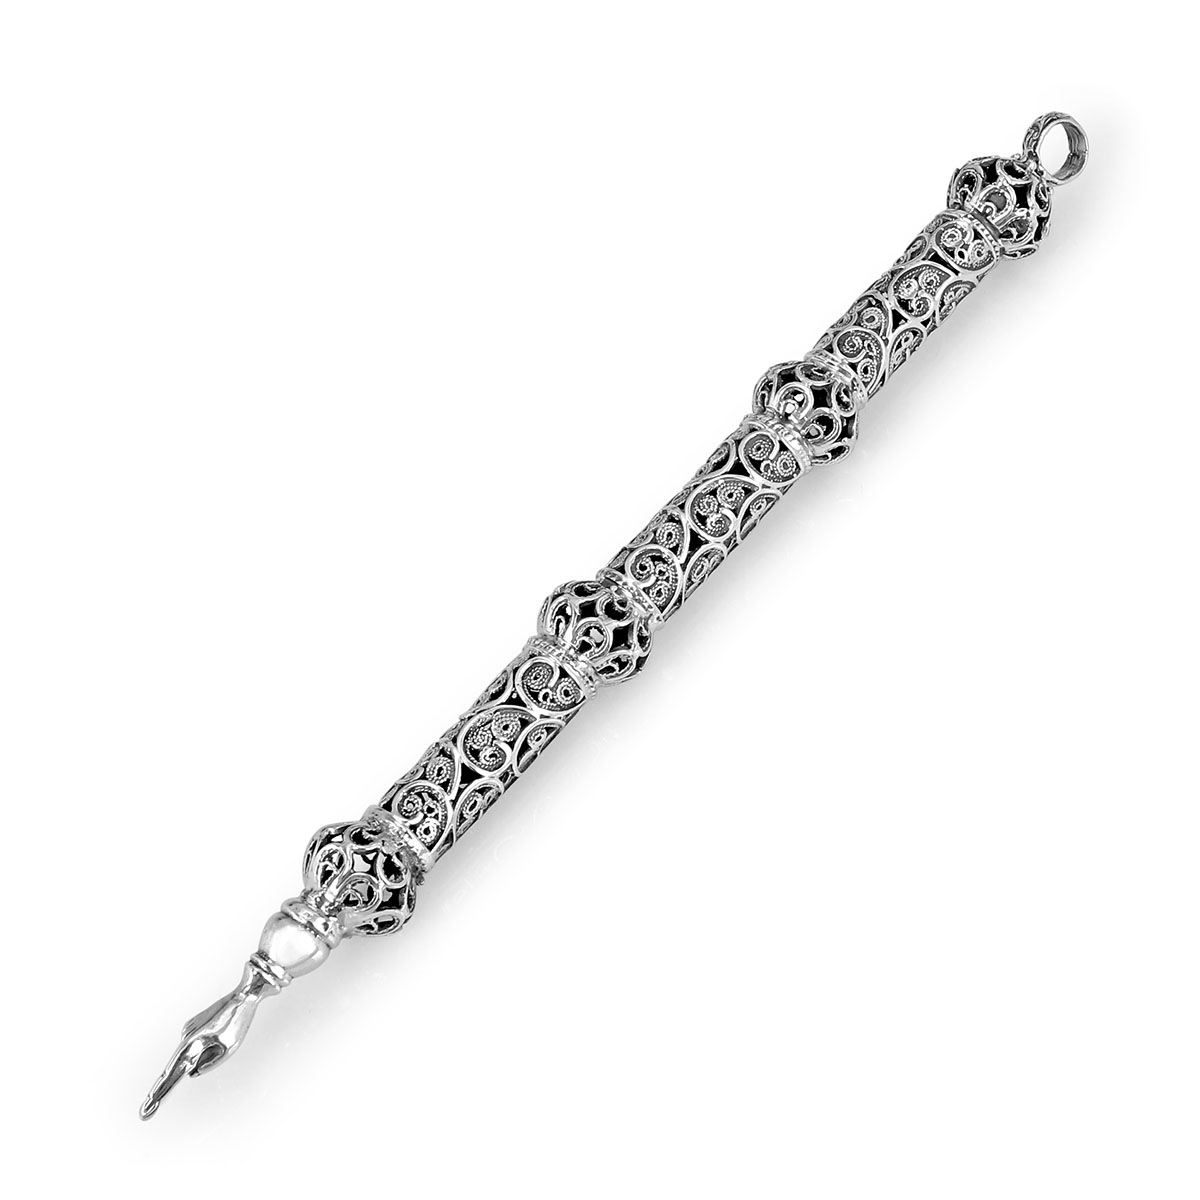 Traditional Yemenite Art Handcrafted Sterling Silver Torah Pointer With Crown-Accented Filigree Design - 1